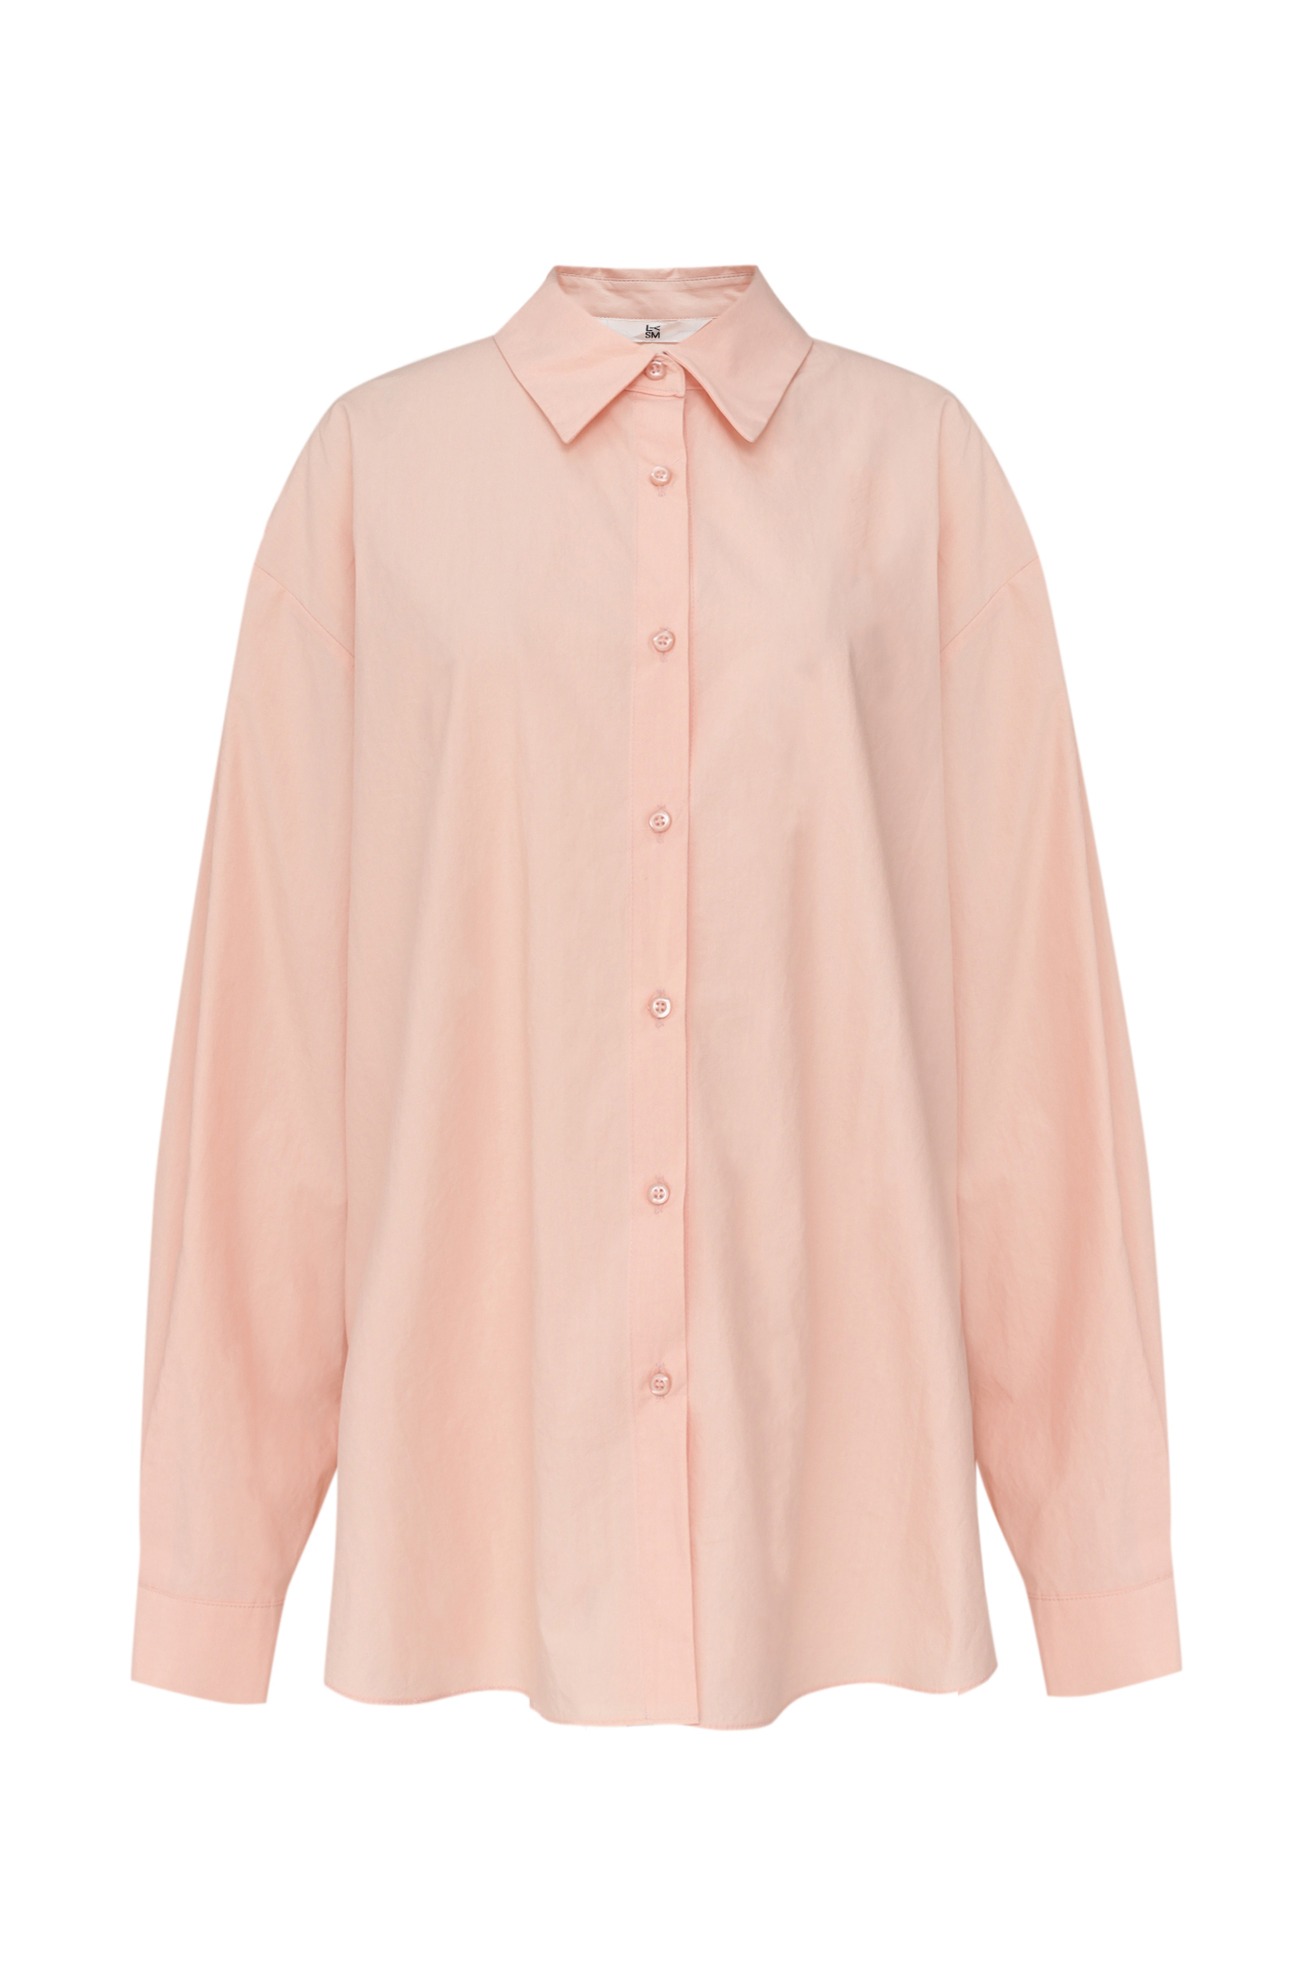 Back Button Oversized Shirt  4/7 순차발송